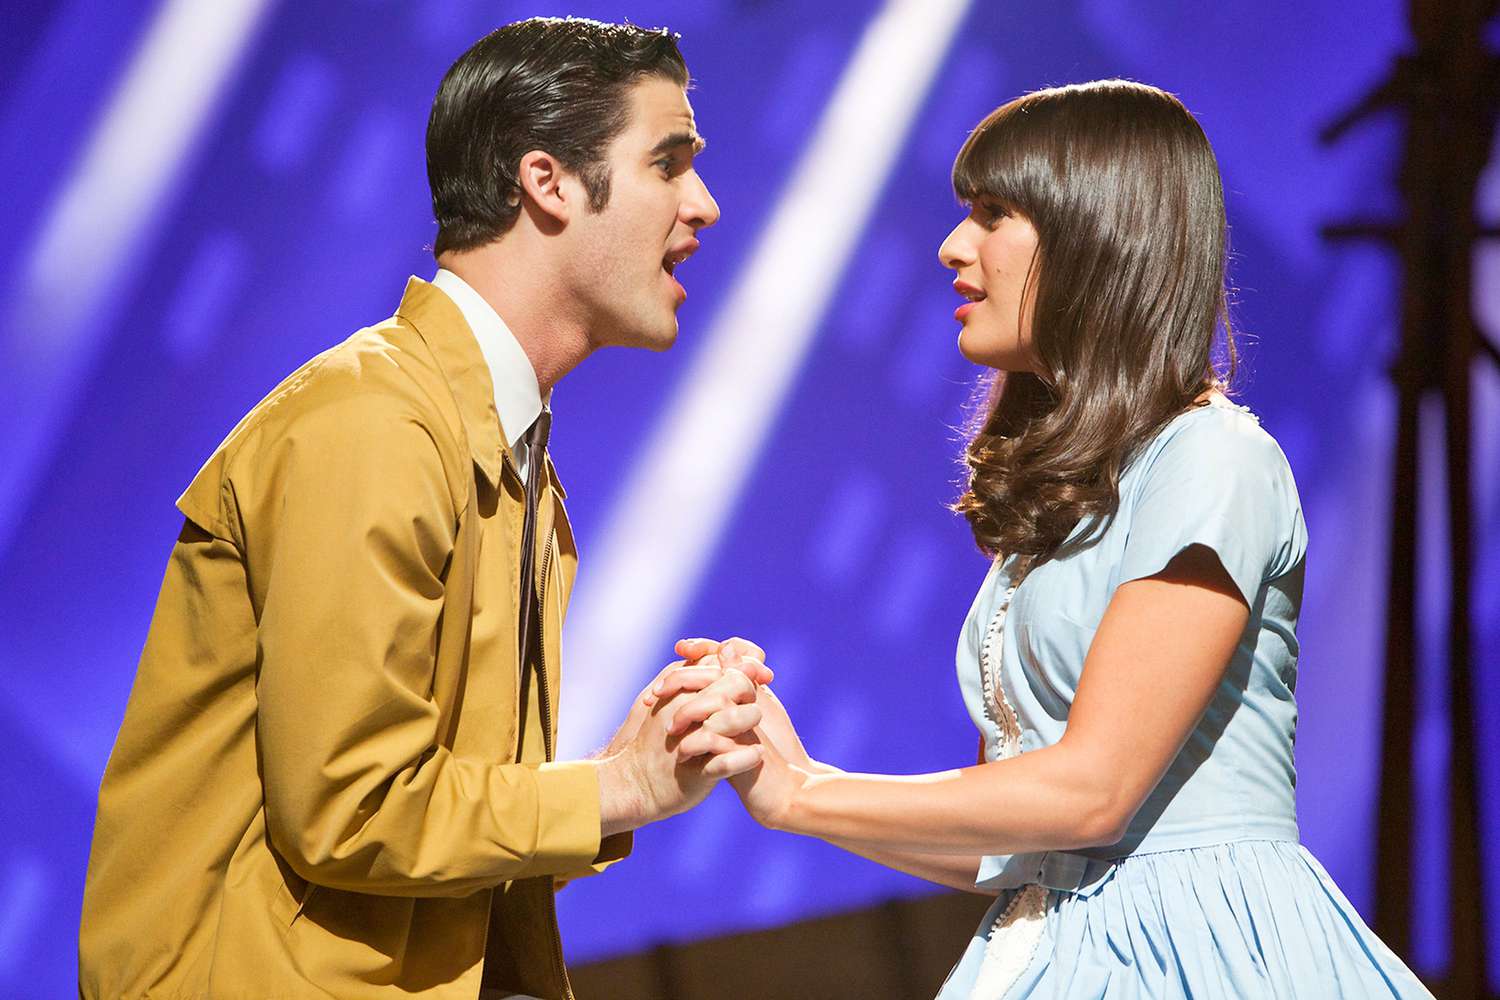 Funny Girl star Lea Michele and Darren Criss have a Glee reunion on Broadway